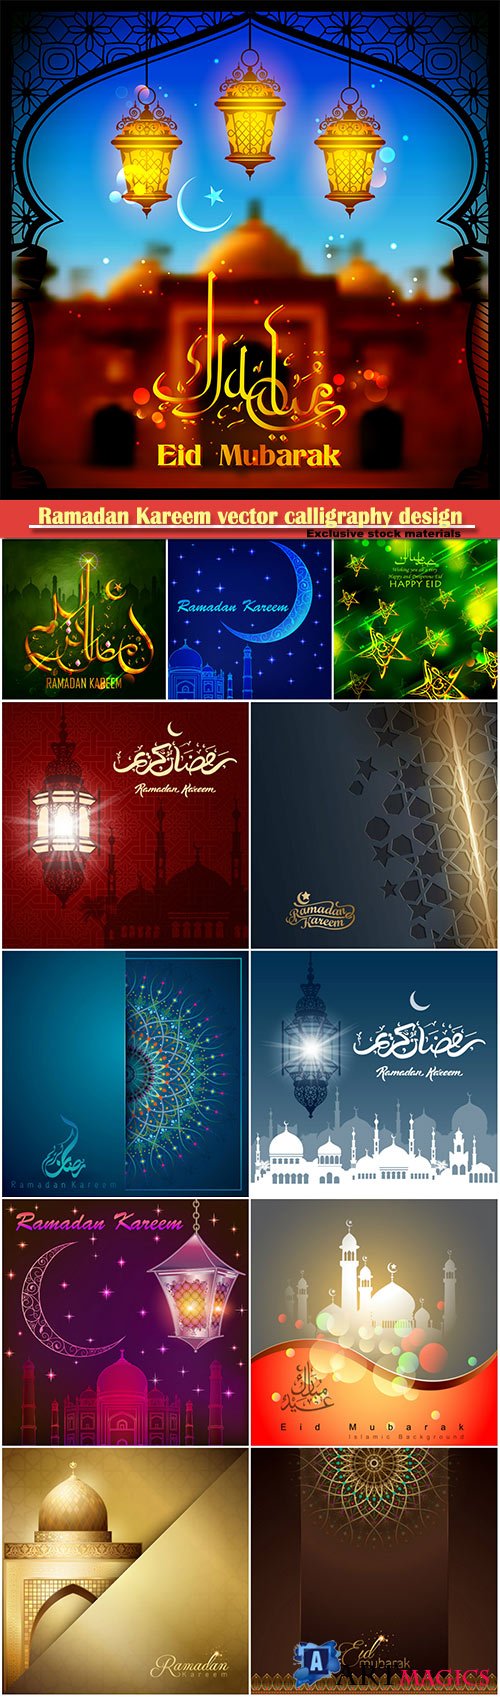 Ramadan Kareem vector calligraphy design with decorative floral pattern, mosque silhouette, crescent and glittering islamic background # 26